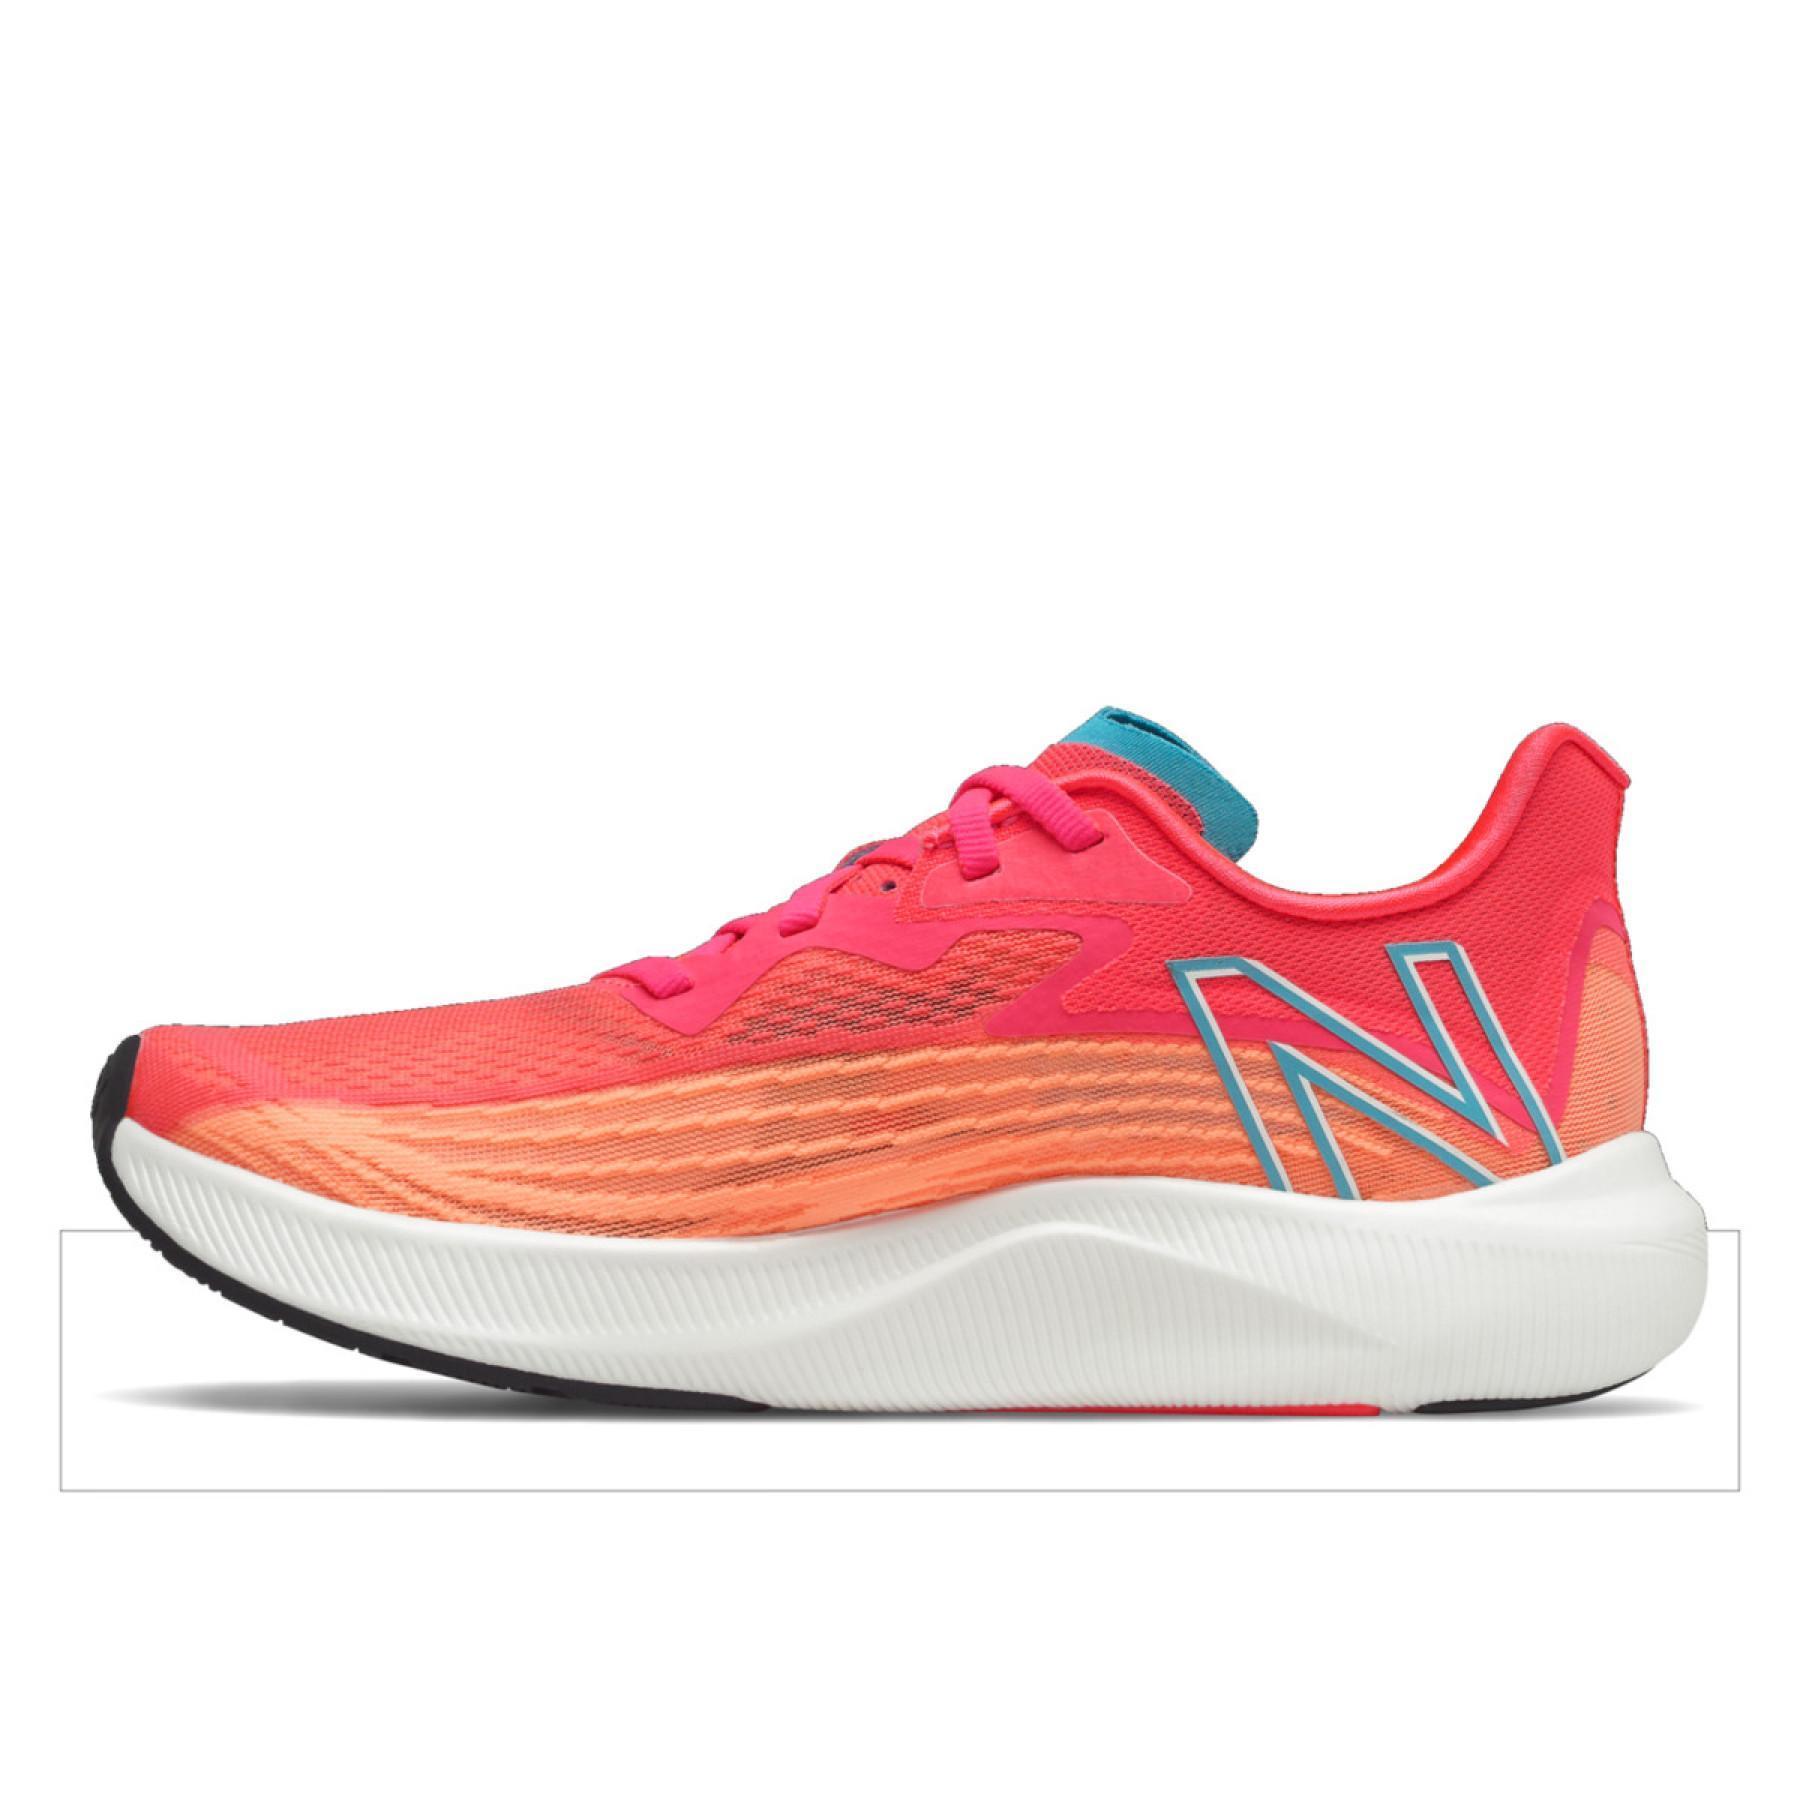 Women's shoes New Balance fuelcell rebel v2